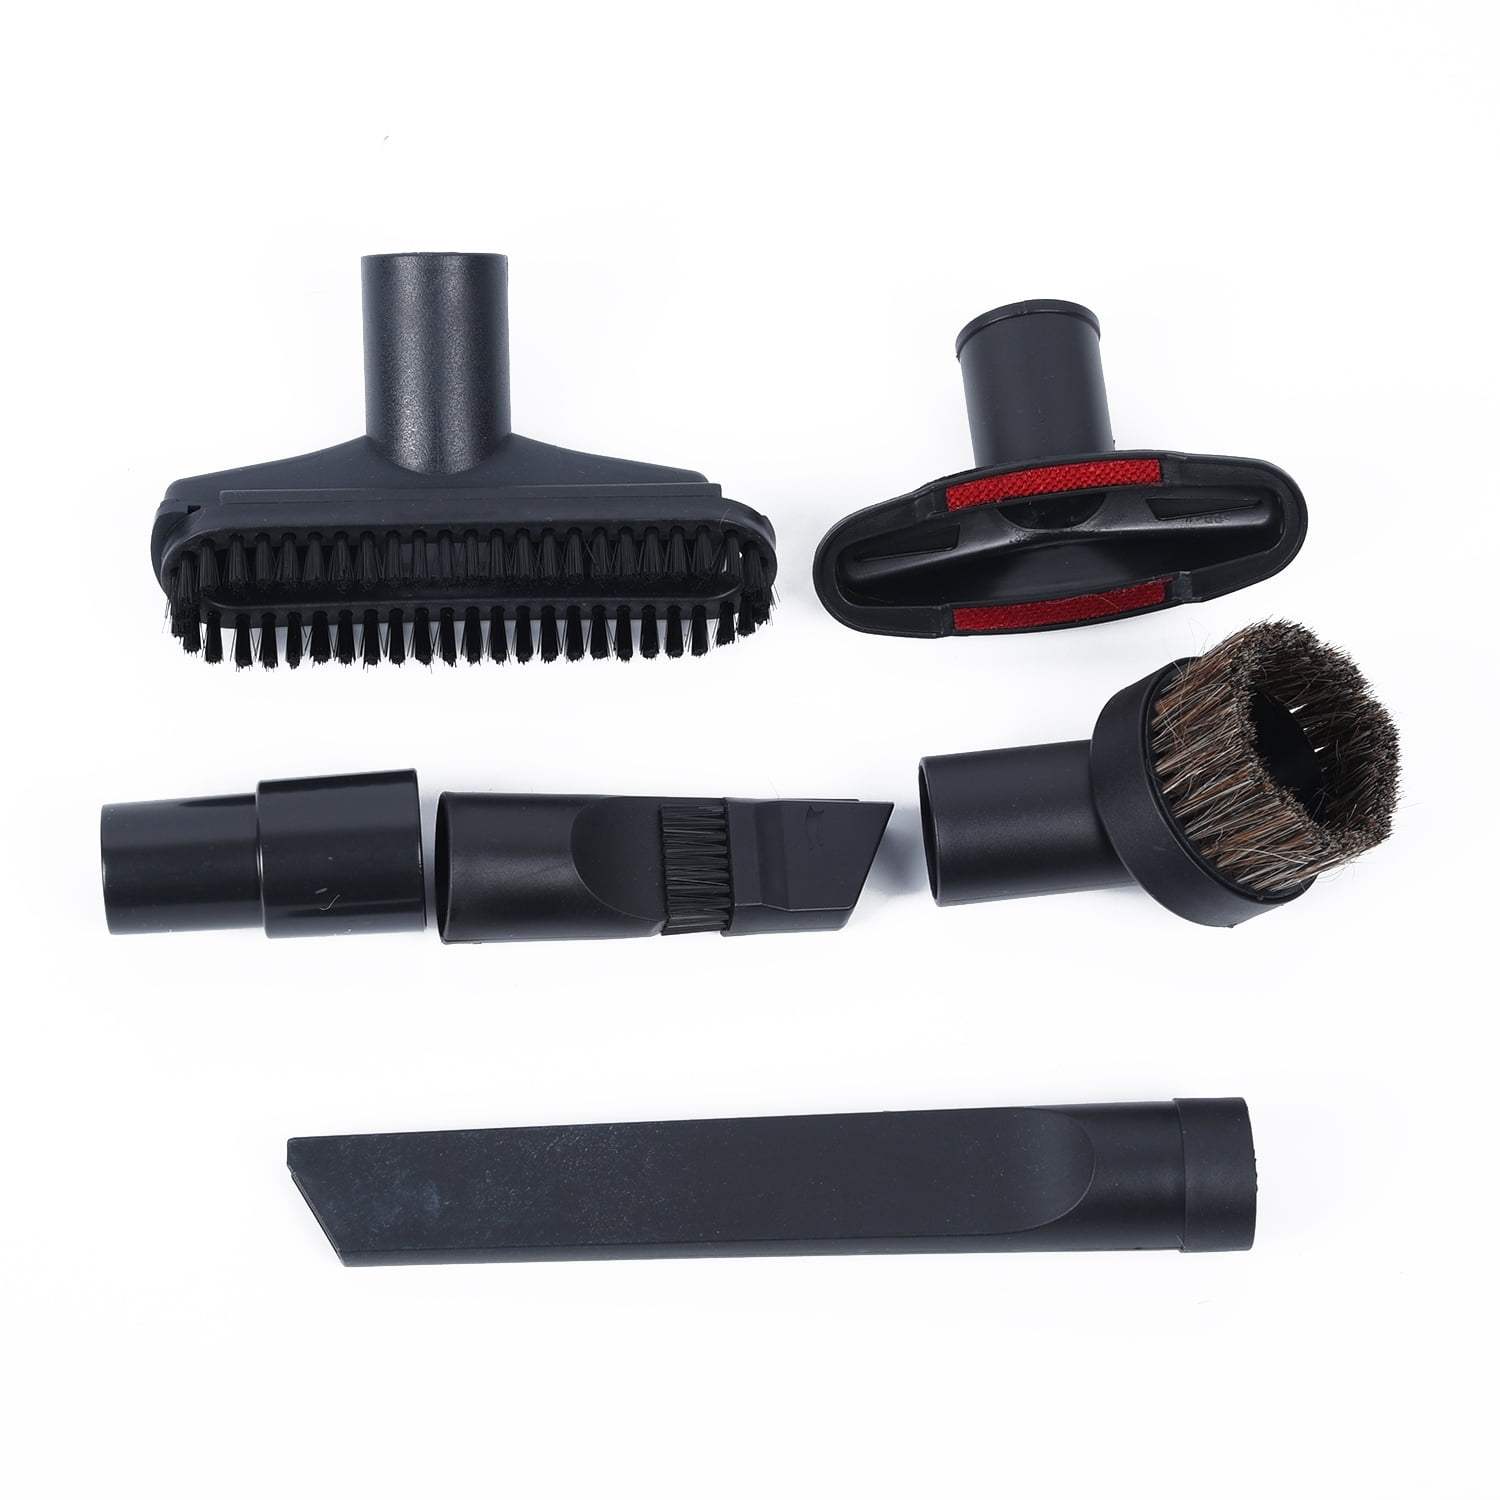 Vacuum Cleaner Parts 7 in 1 Vacuum Cleaner Brush Nozzle Home Dusting Crevice Stair Tool Kit 32mm and 35mm Vacuum Accessories Dusty Brush Kit